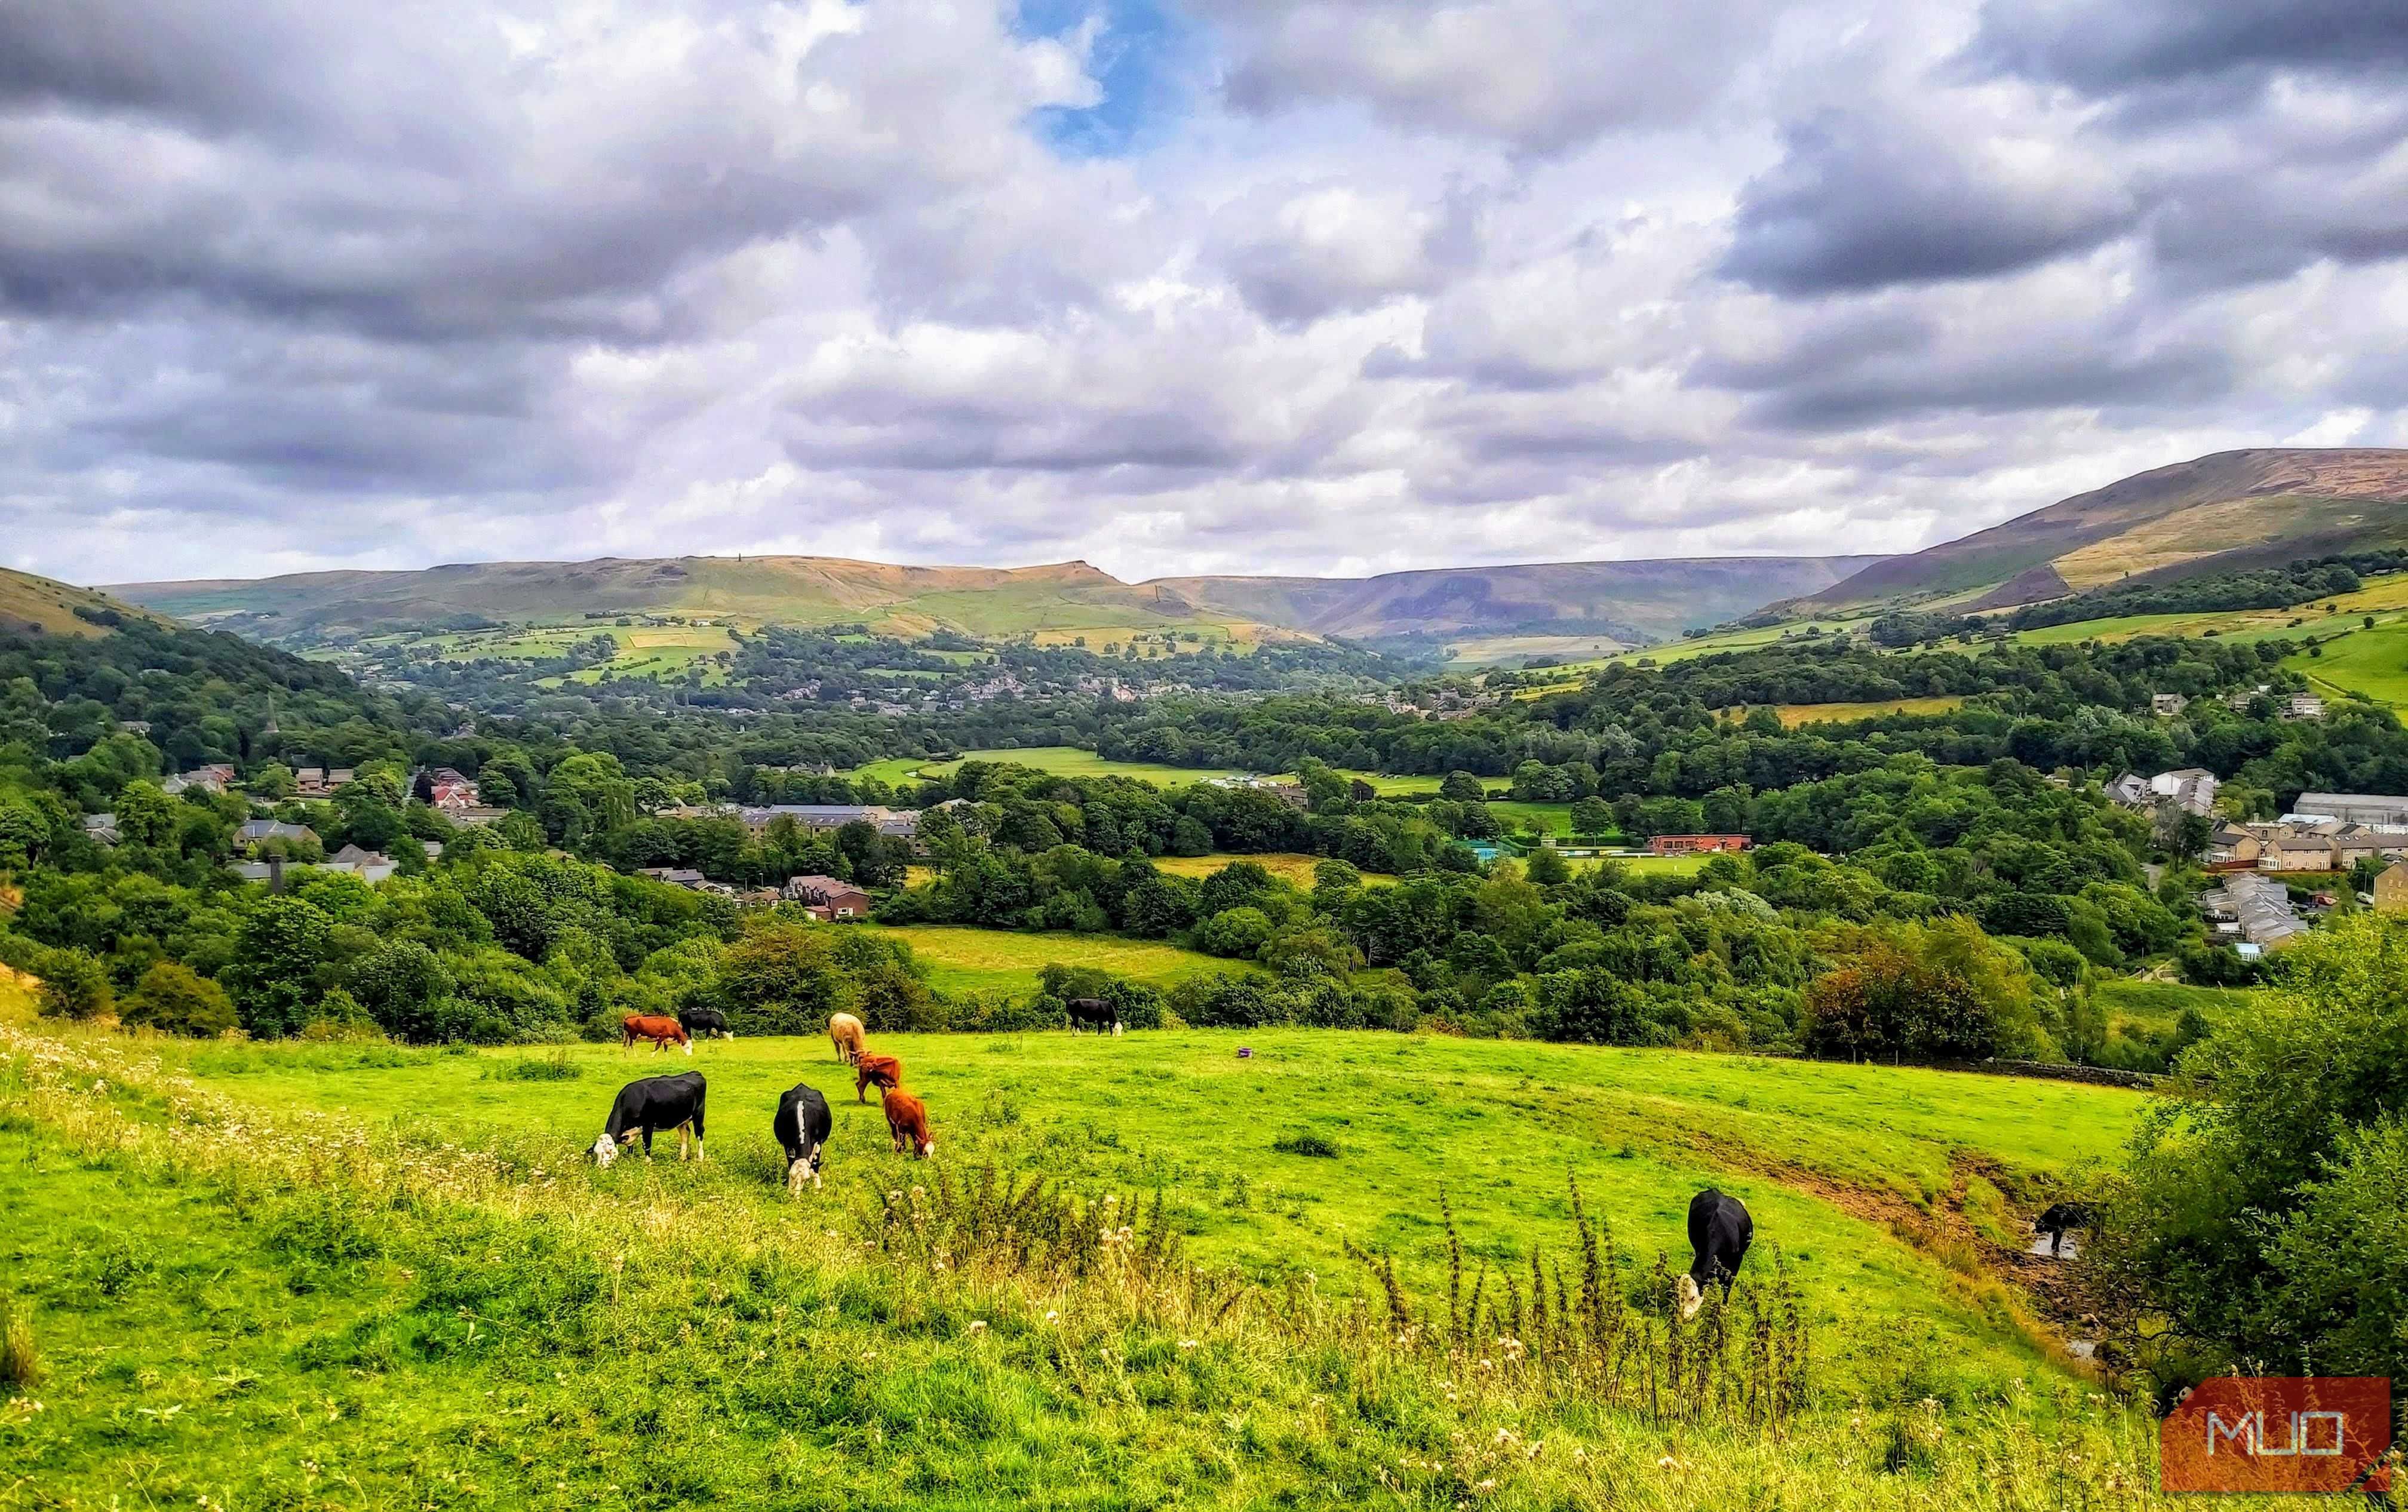 A view of Saddleworth, with a range of edits made to improve the photo